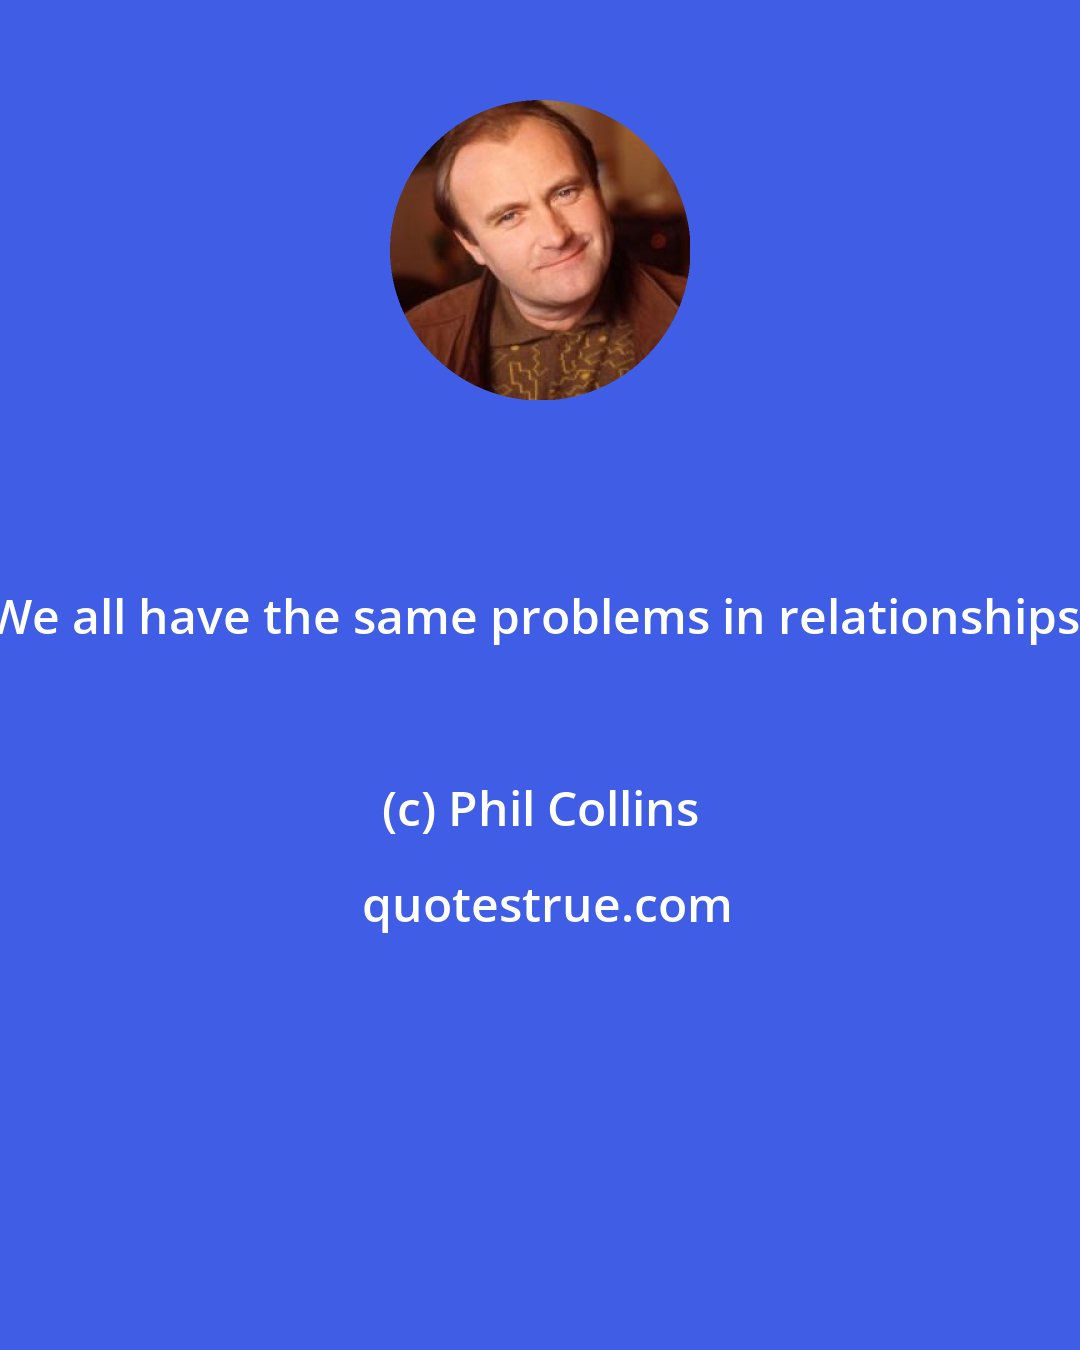 Phil Collins: We all have the same problems in relationships.